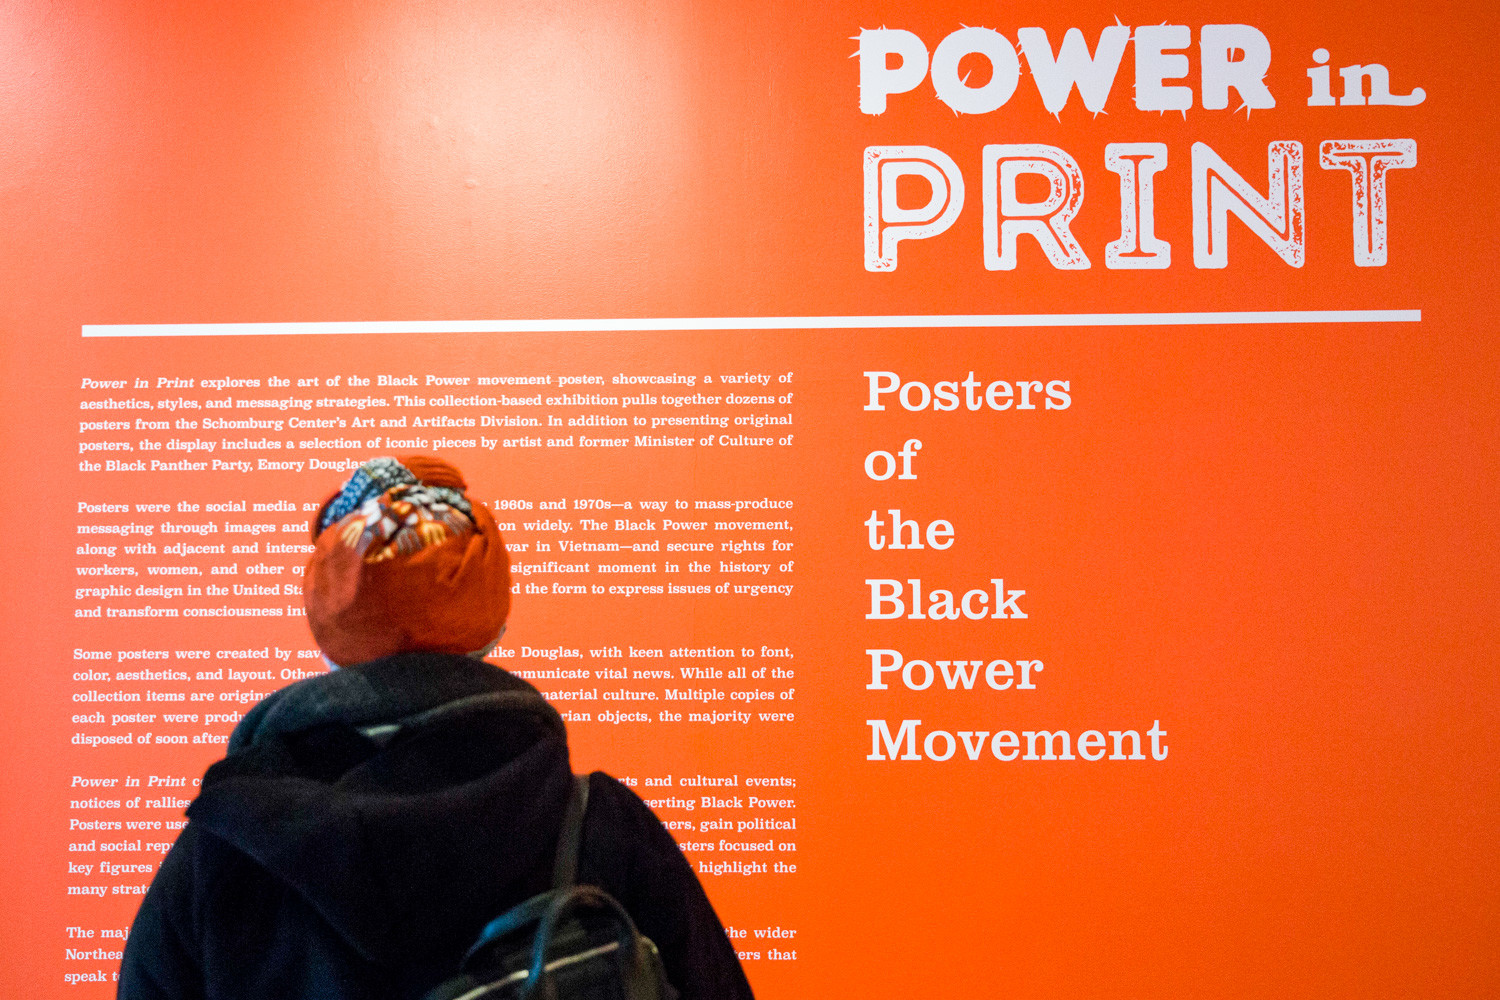 With nearly 60 pieces, ‘Power in Print’ at Schomburg Center for Research in Black Culture in Harlem, shows the posters of the black power movement. It was a dramatic change in how people organized politically and how they represented themselves, says Mark Naison, a history and African-American studies professor at Fordham University.